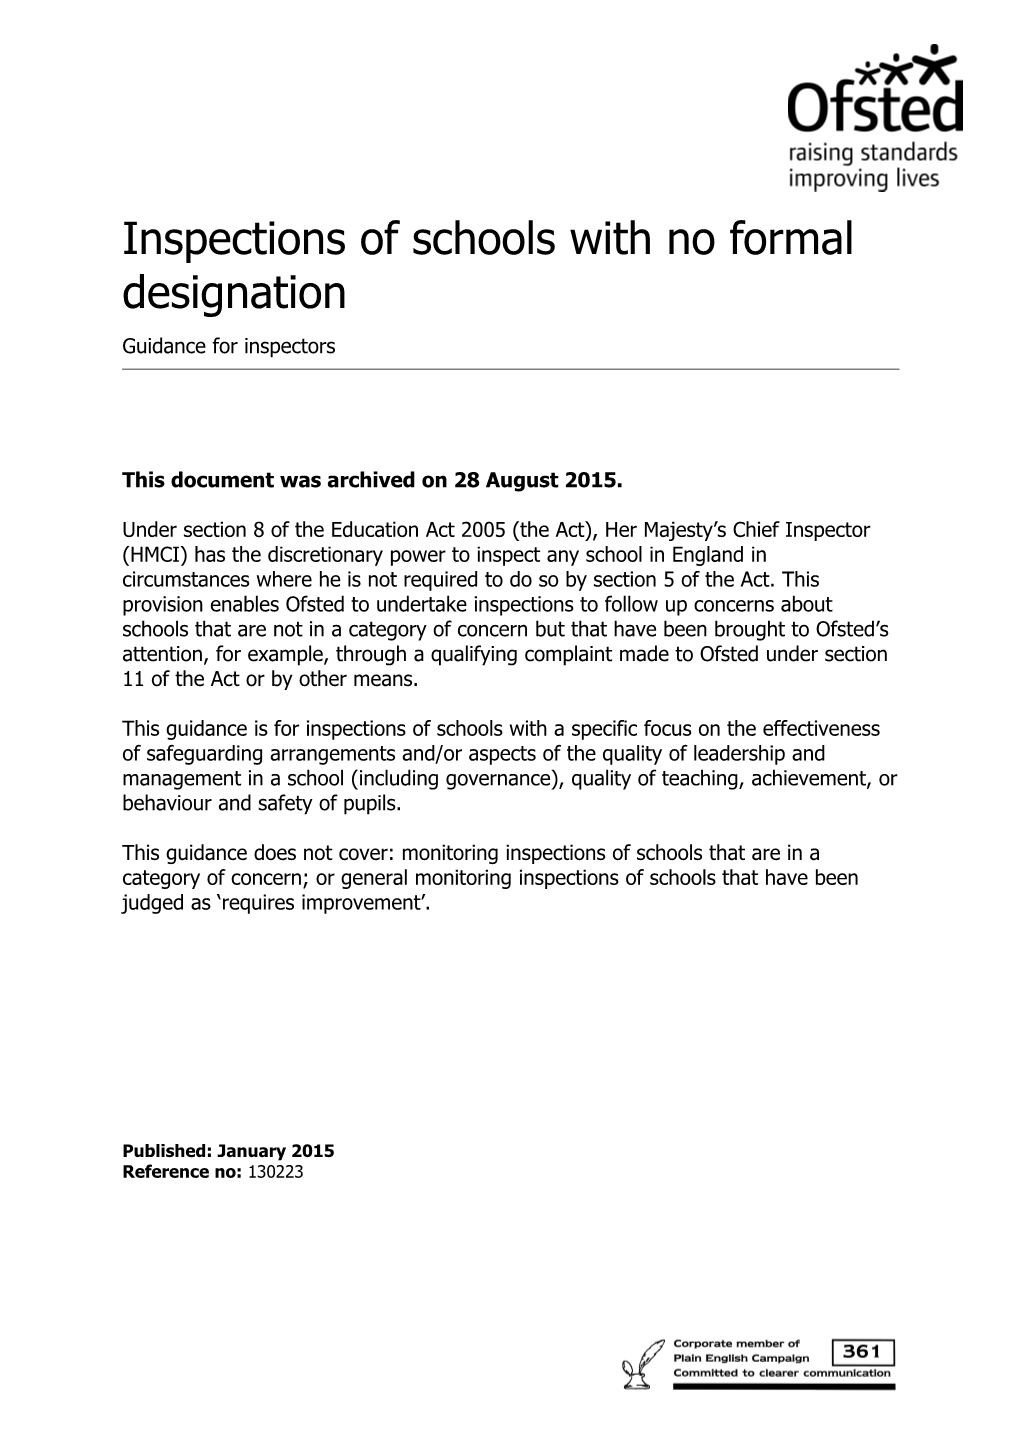 Inspections of Schools with No Formal Designation